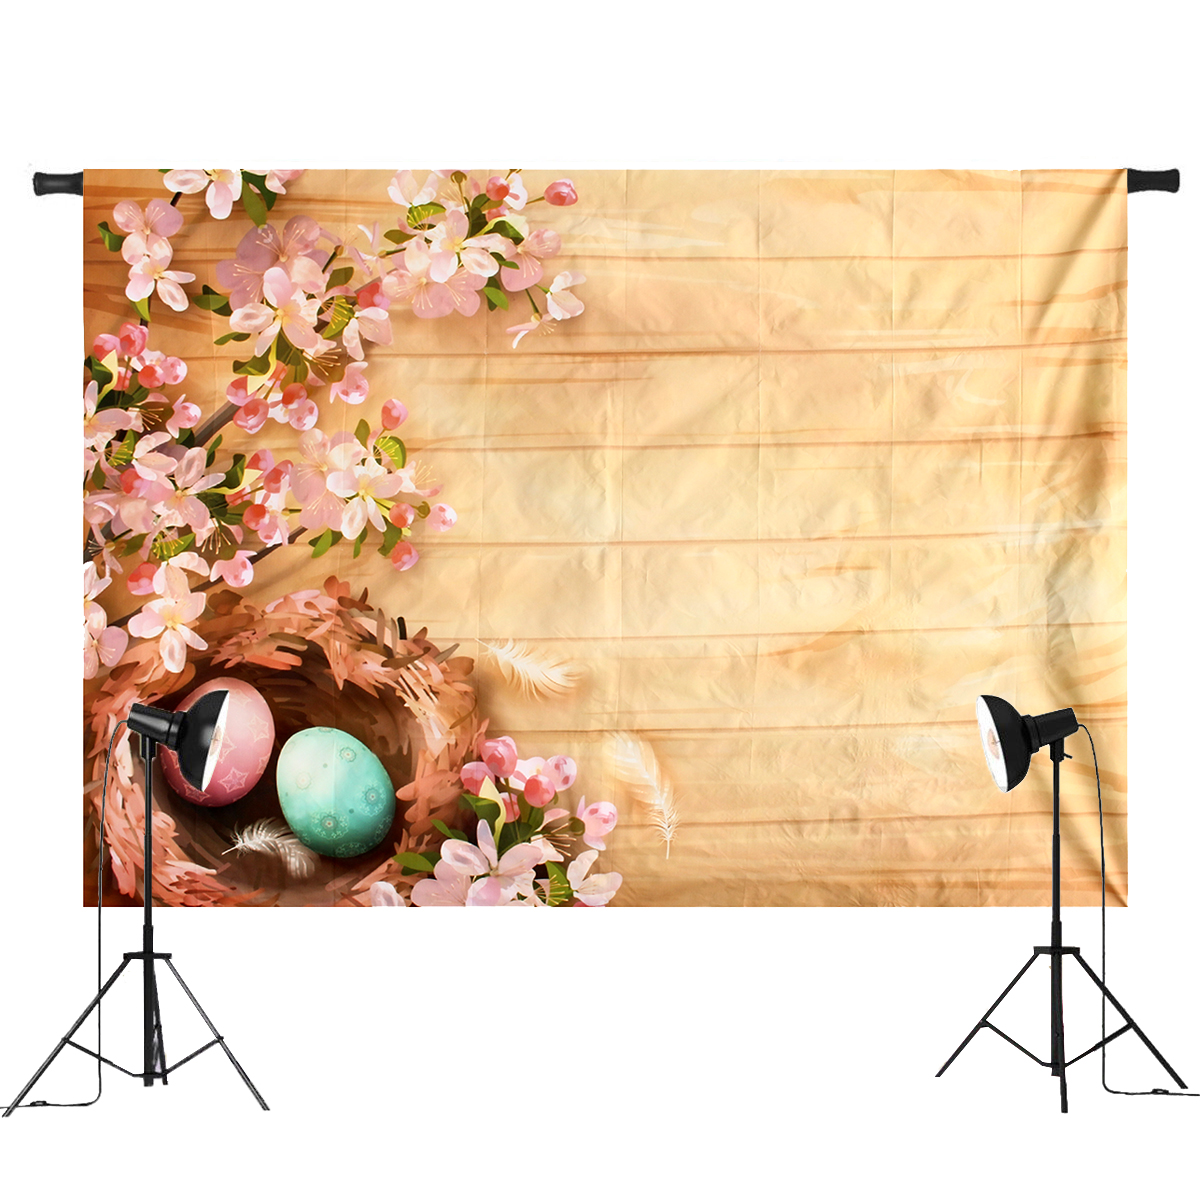 7x5FT-Blooms-Flower-Easter-Eggs-Photography-Backdrop-Studio-Prop-Background-1392188-1